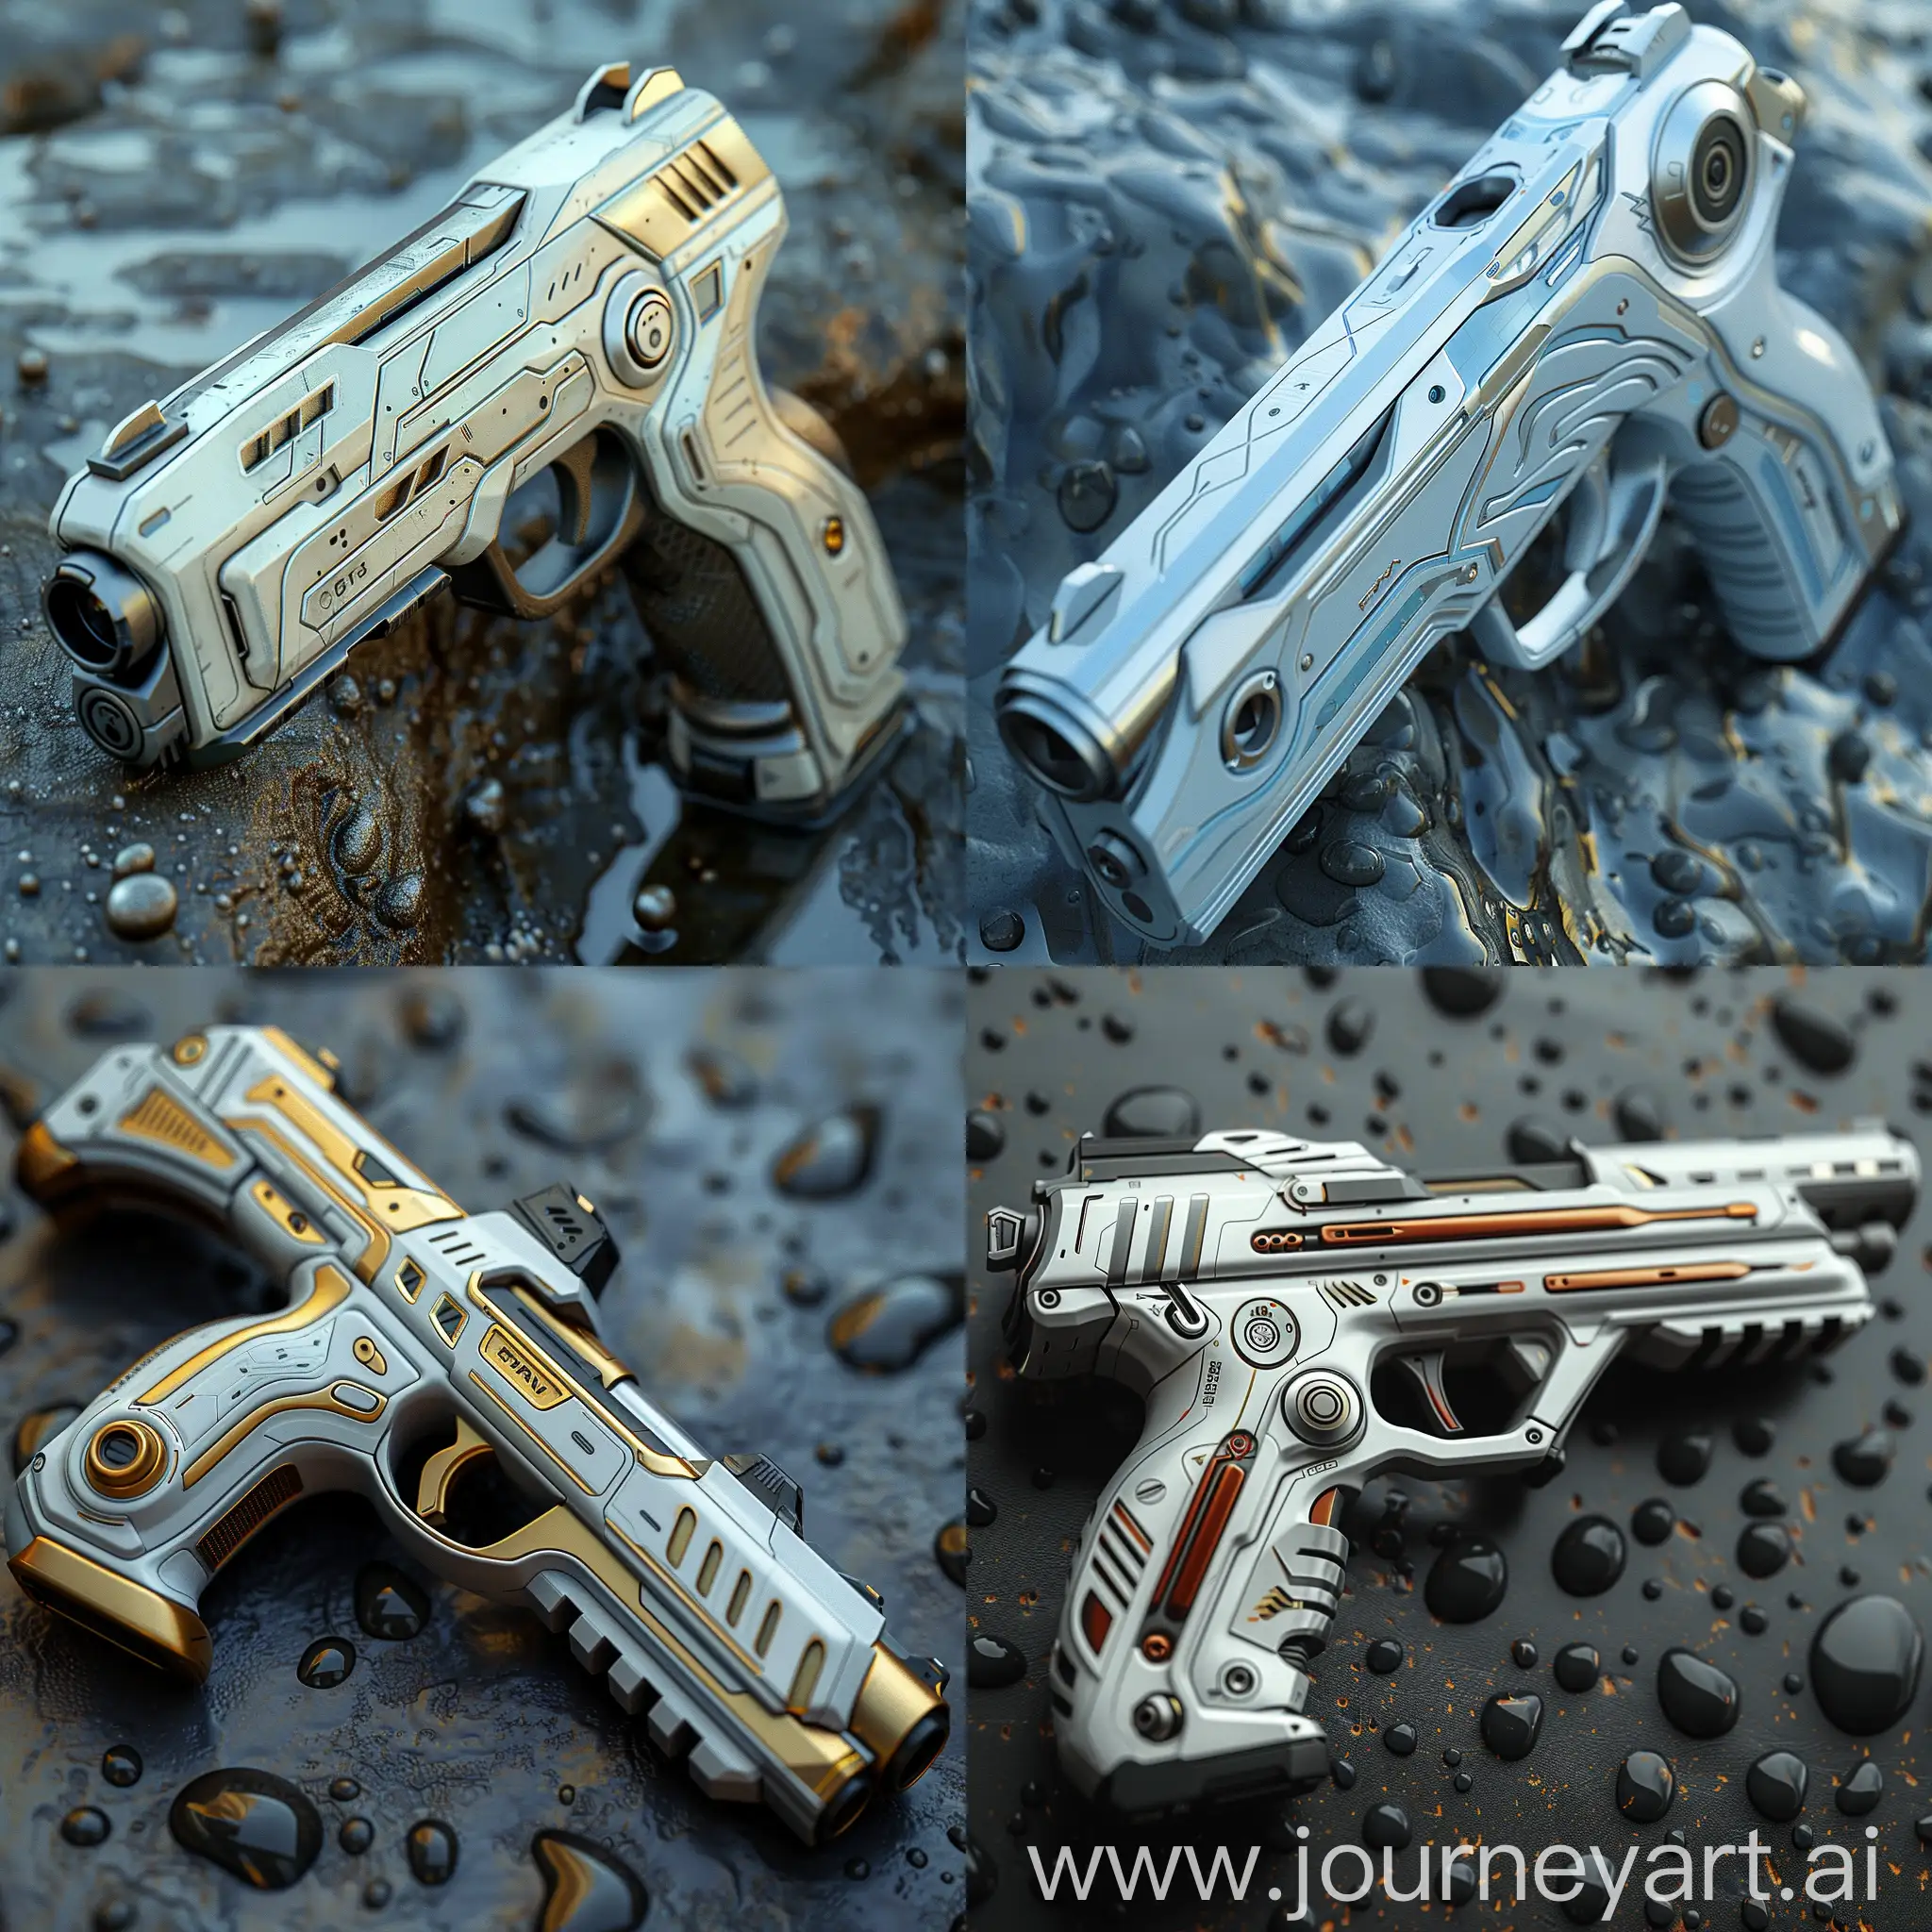 Futuristic-EcoFriendly-Stainless-Steel-Pistol-with-Smart-Materials-High-Tech-Design